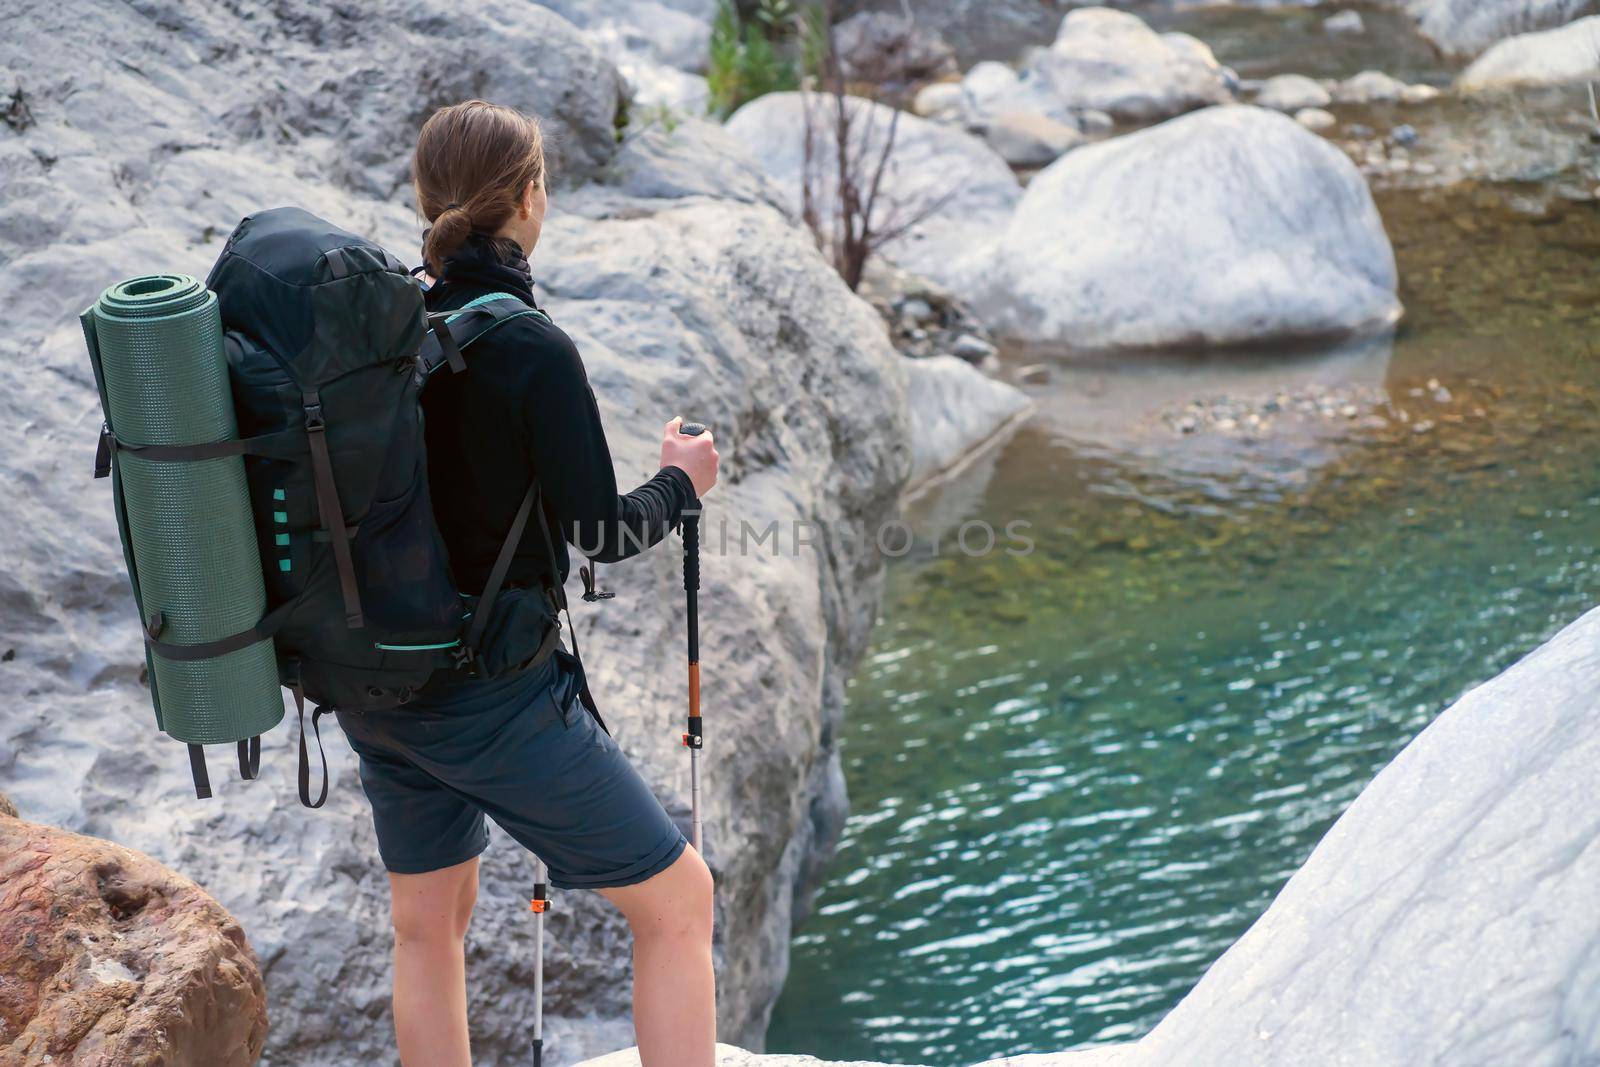 Young girl with a backpack and in hiking clothes holds trekking poles. Traveler looks at a transparent mountain river and rocks, is engaged in journey along the trail.